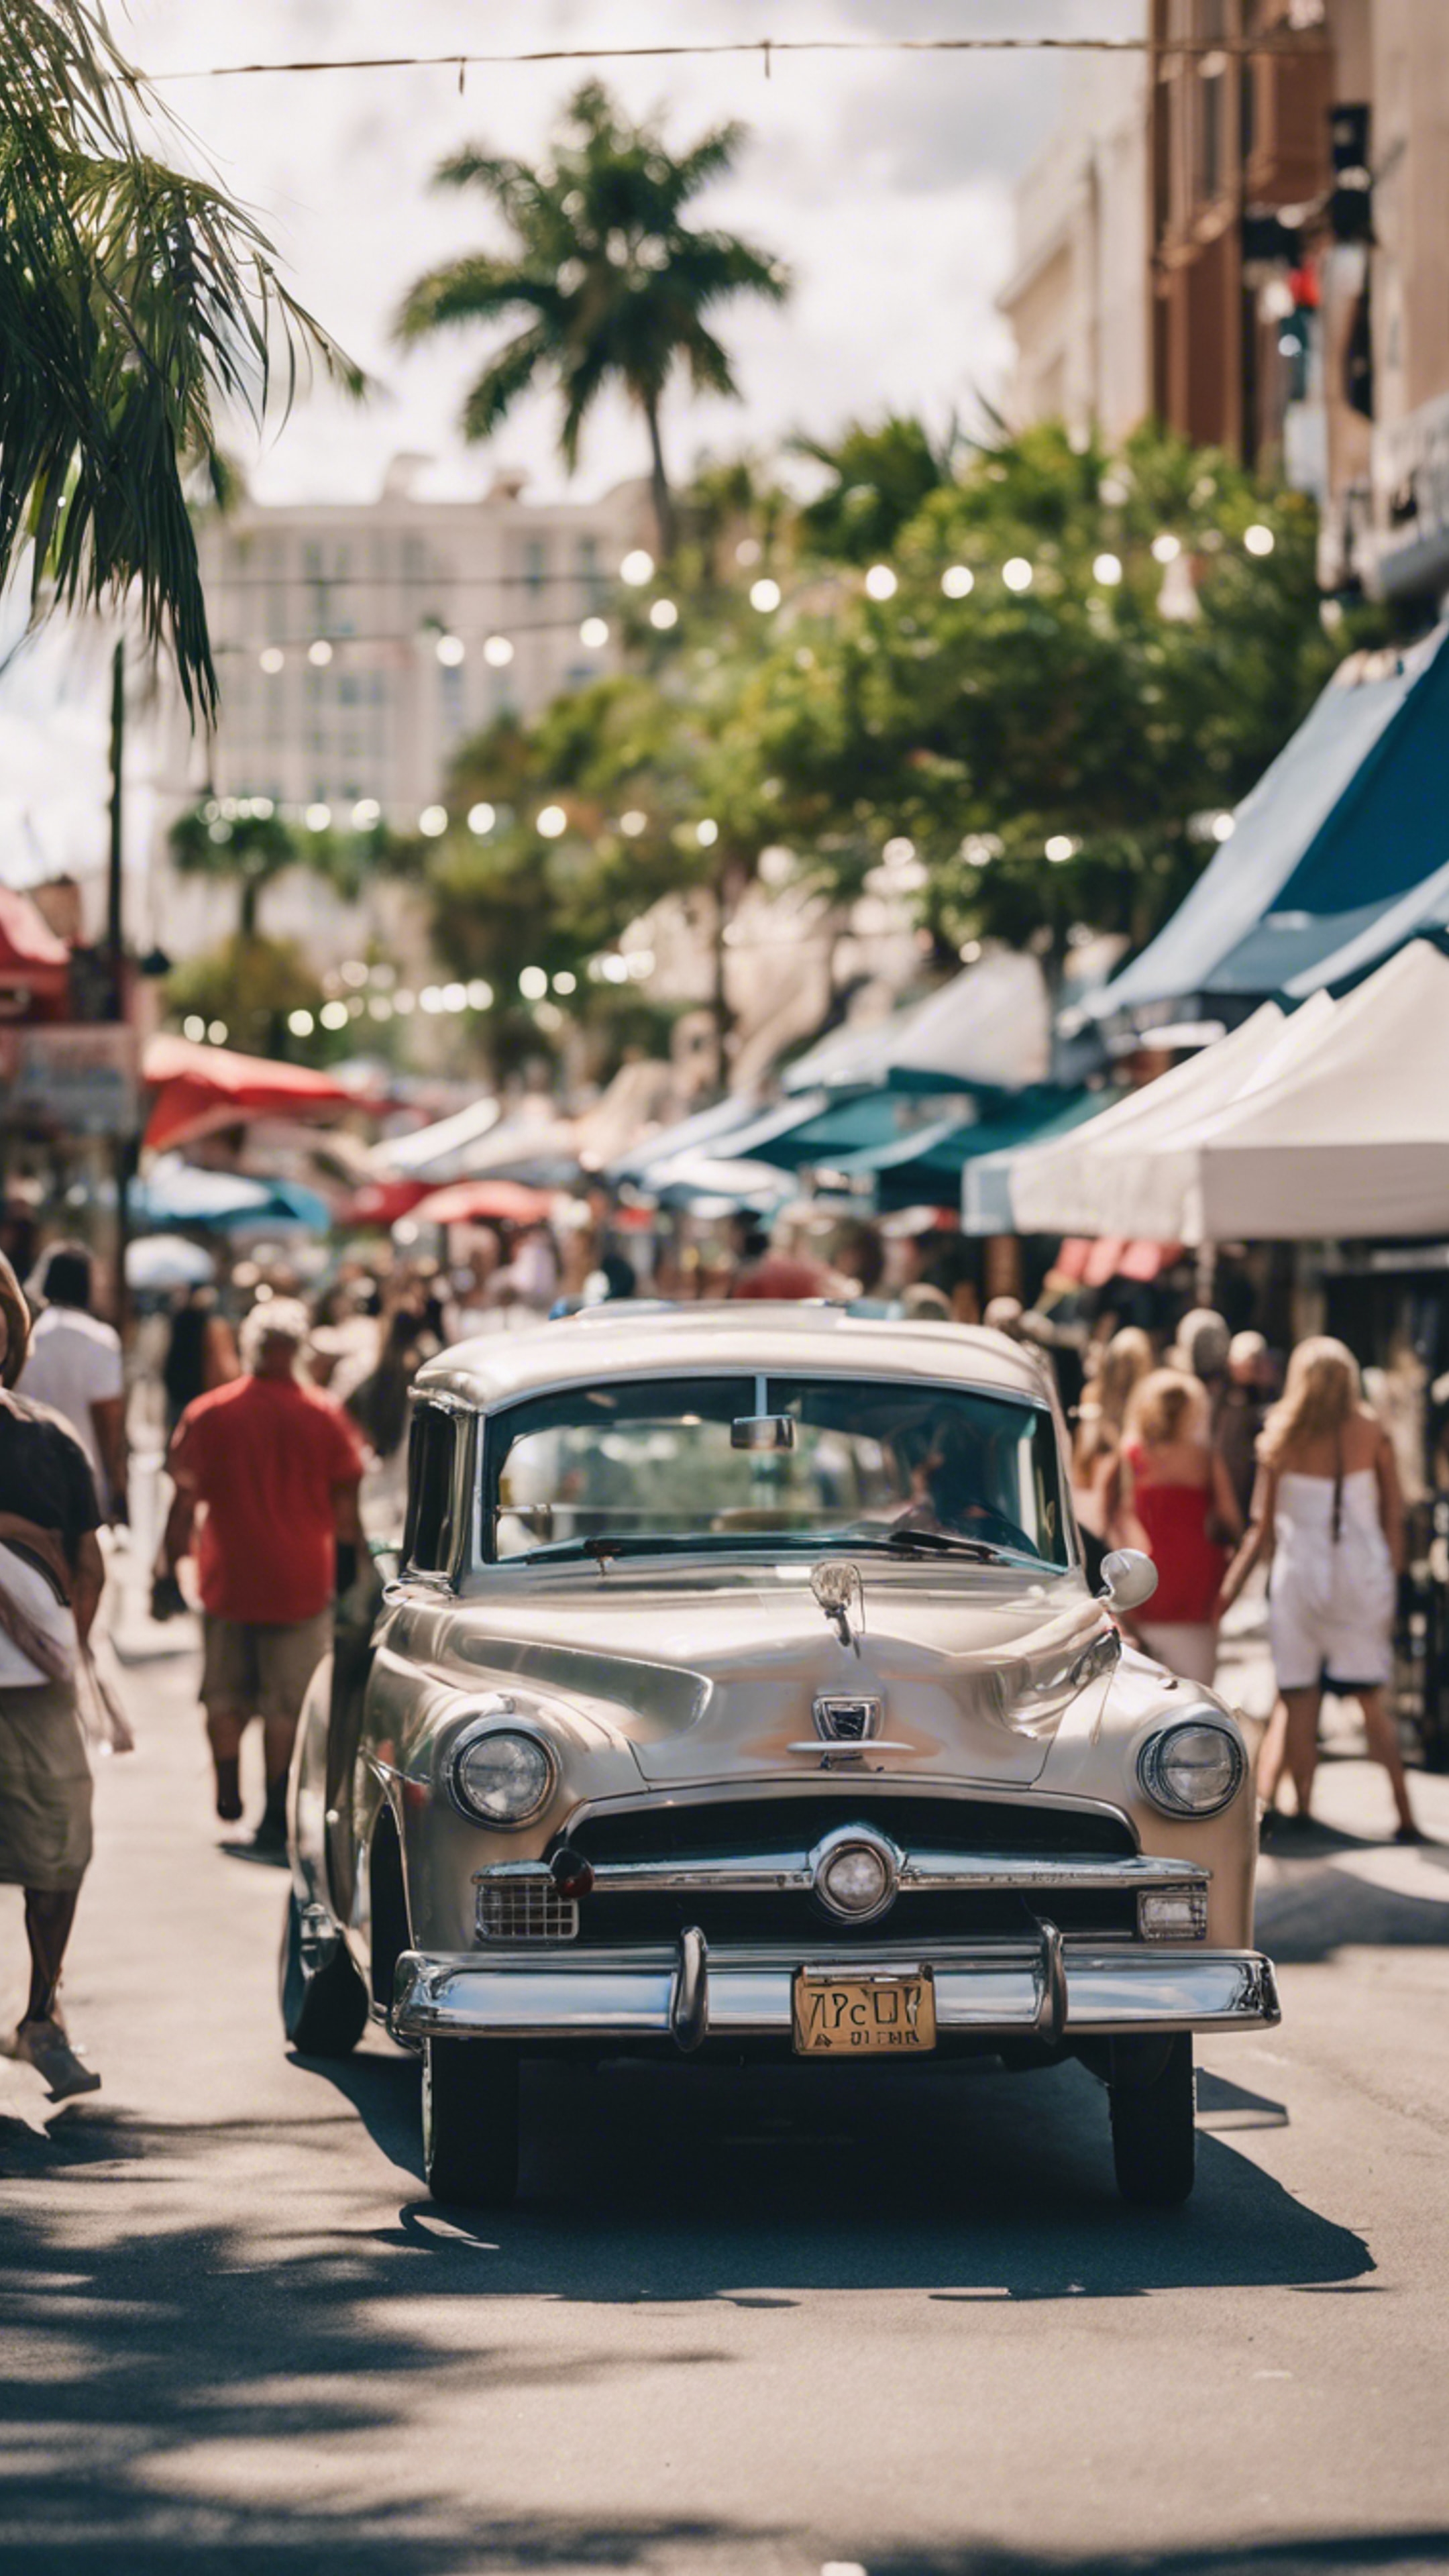 The art and culture-filled streets of downtown West Palm Beach on a Saturday Market Day. Тапет[9e1e82f0b2784fd0ae58]